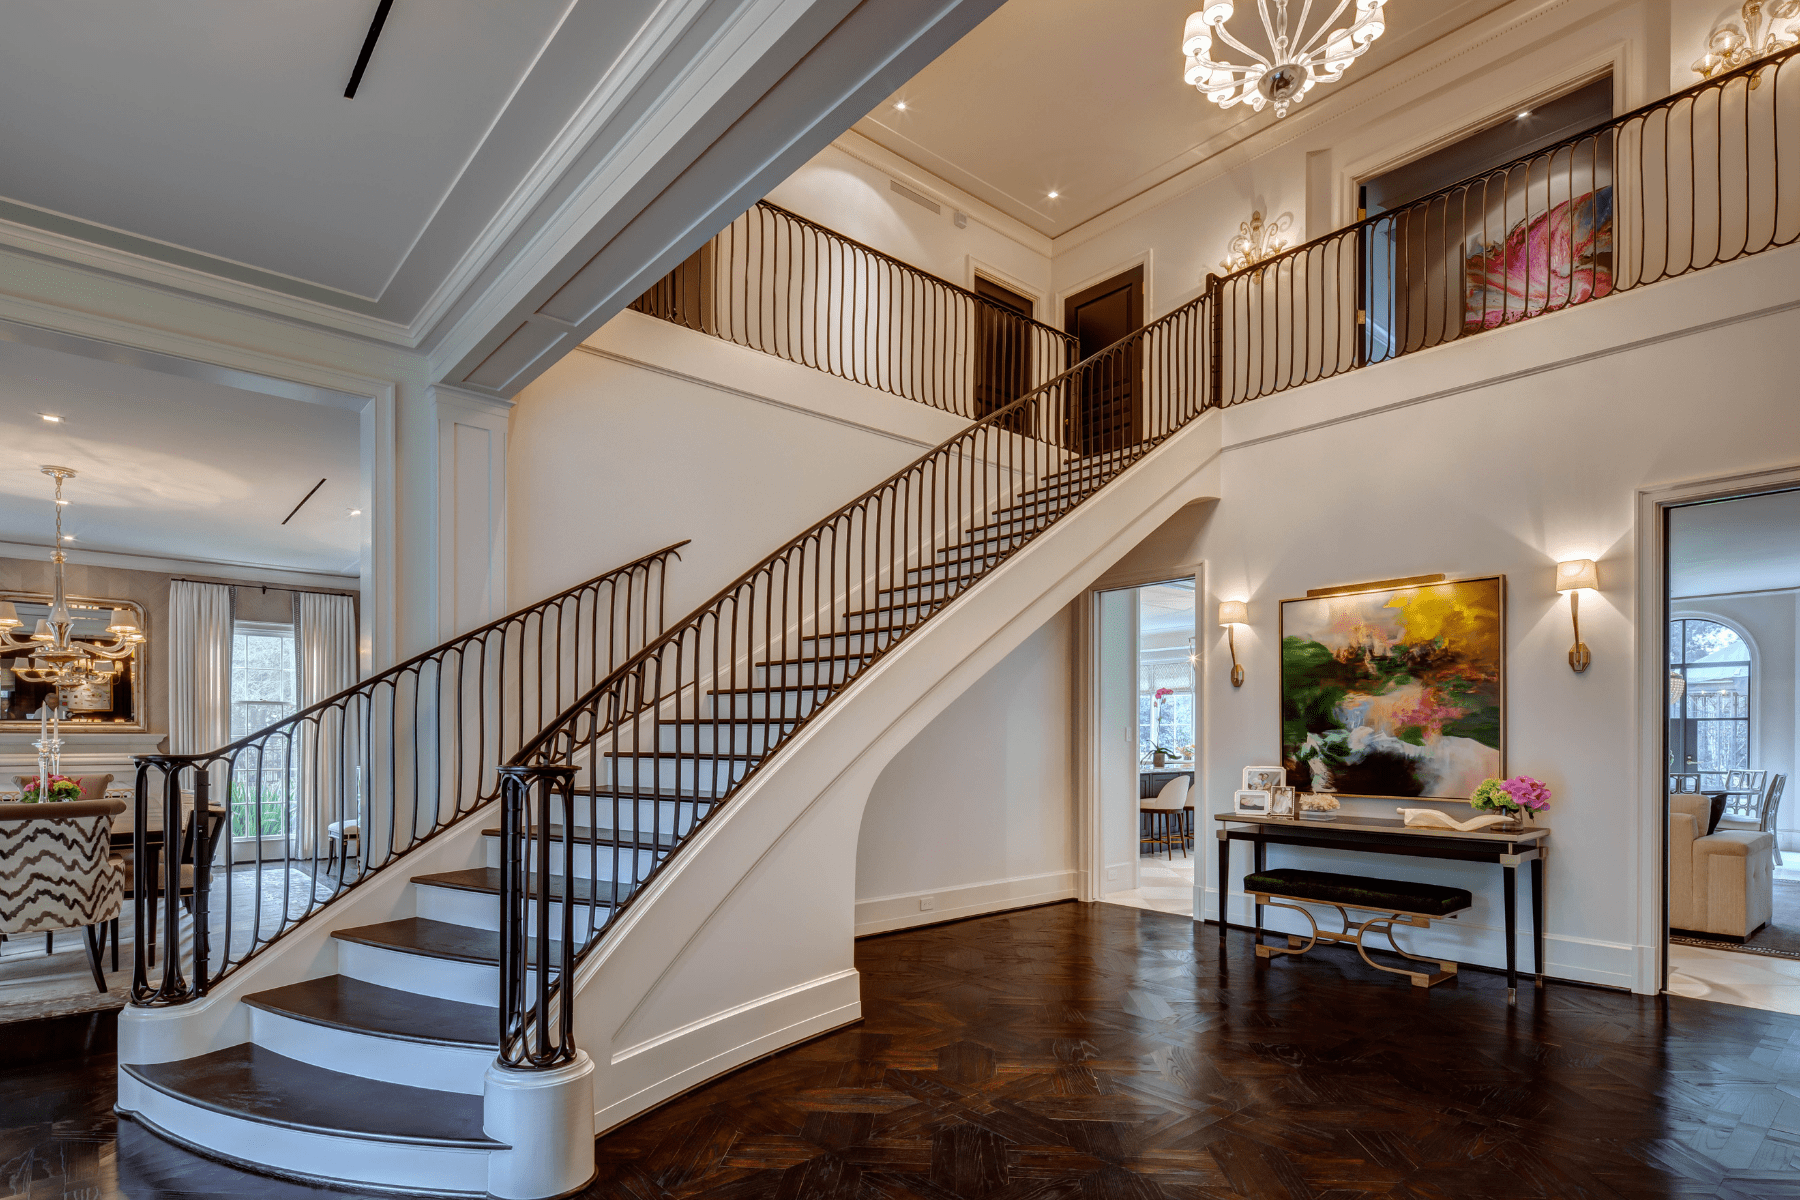 The chic staircase at leading to the Willowick bedrooms.